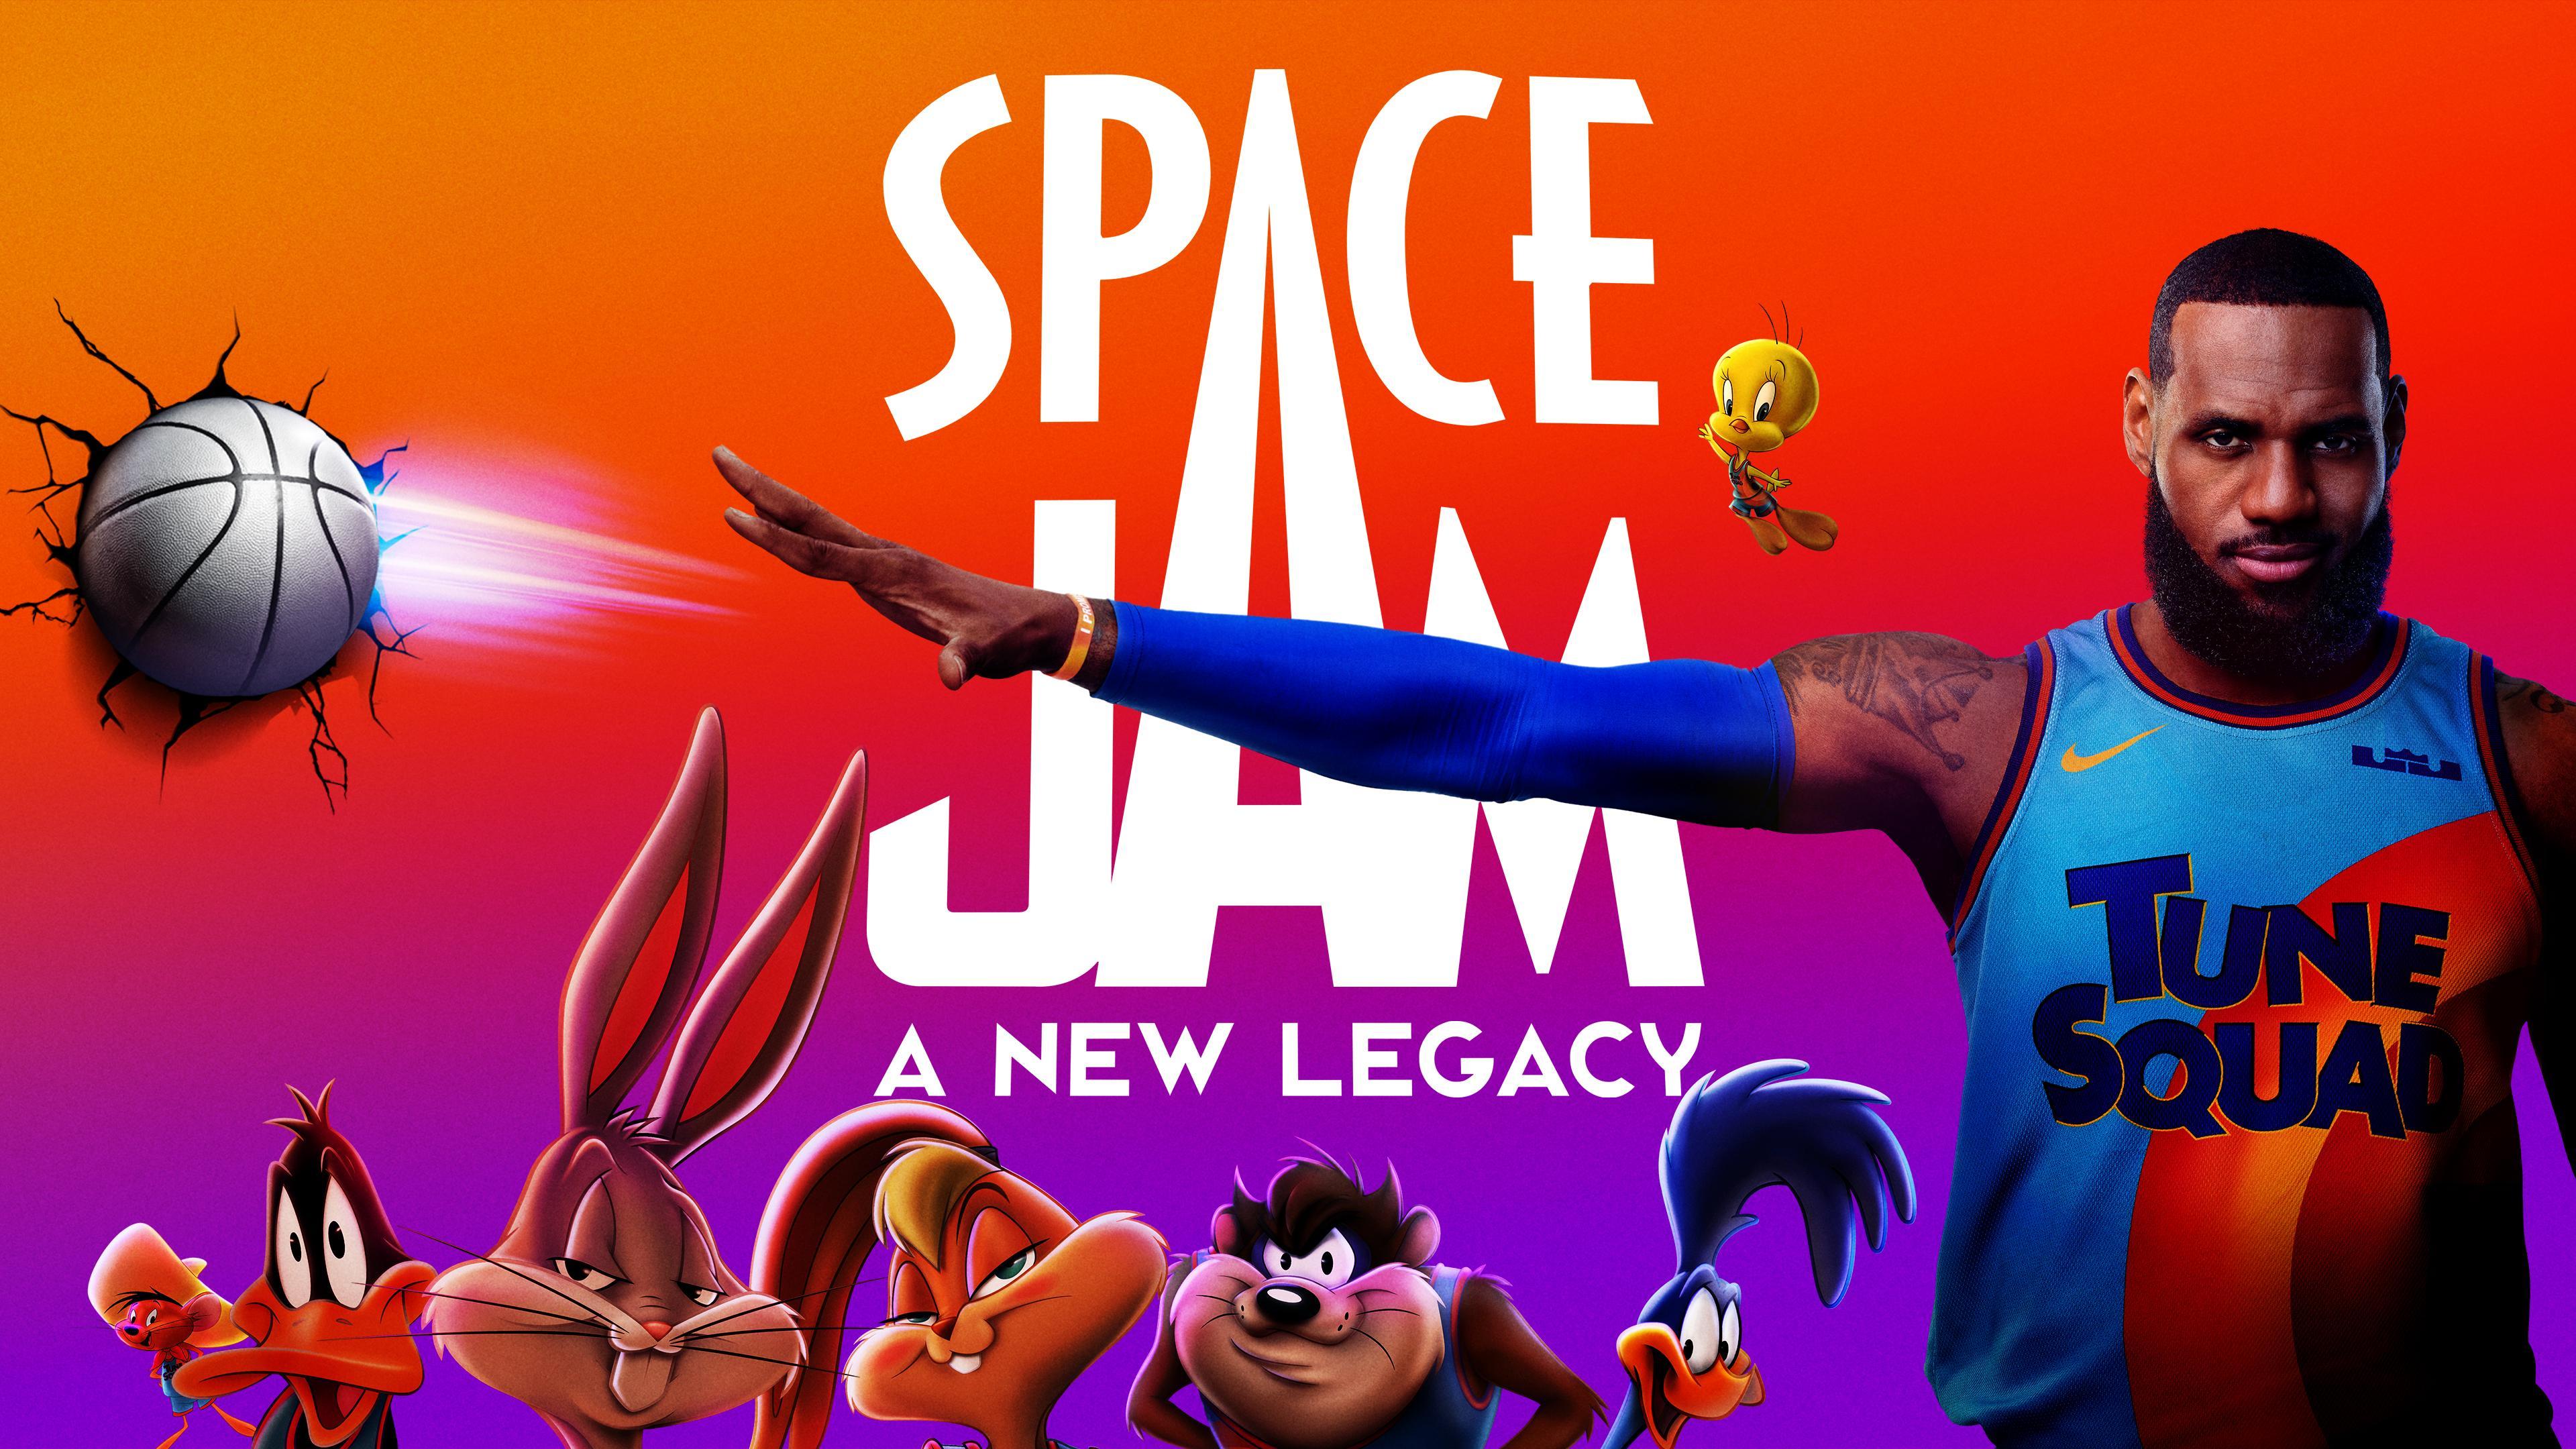 Watch Space Jam: A New Legacy